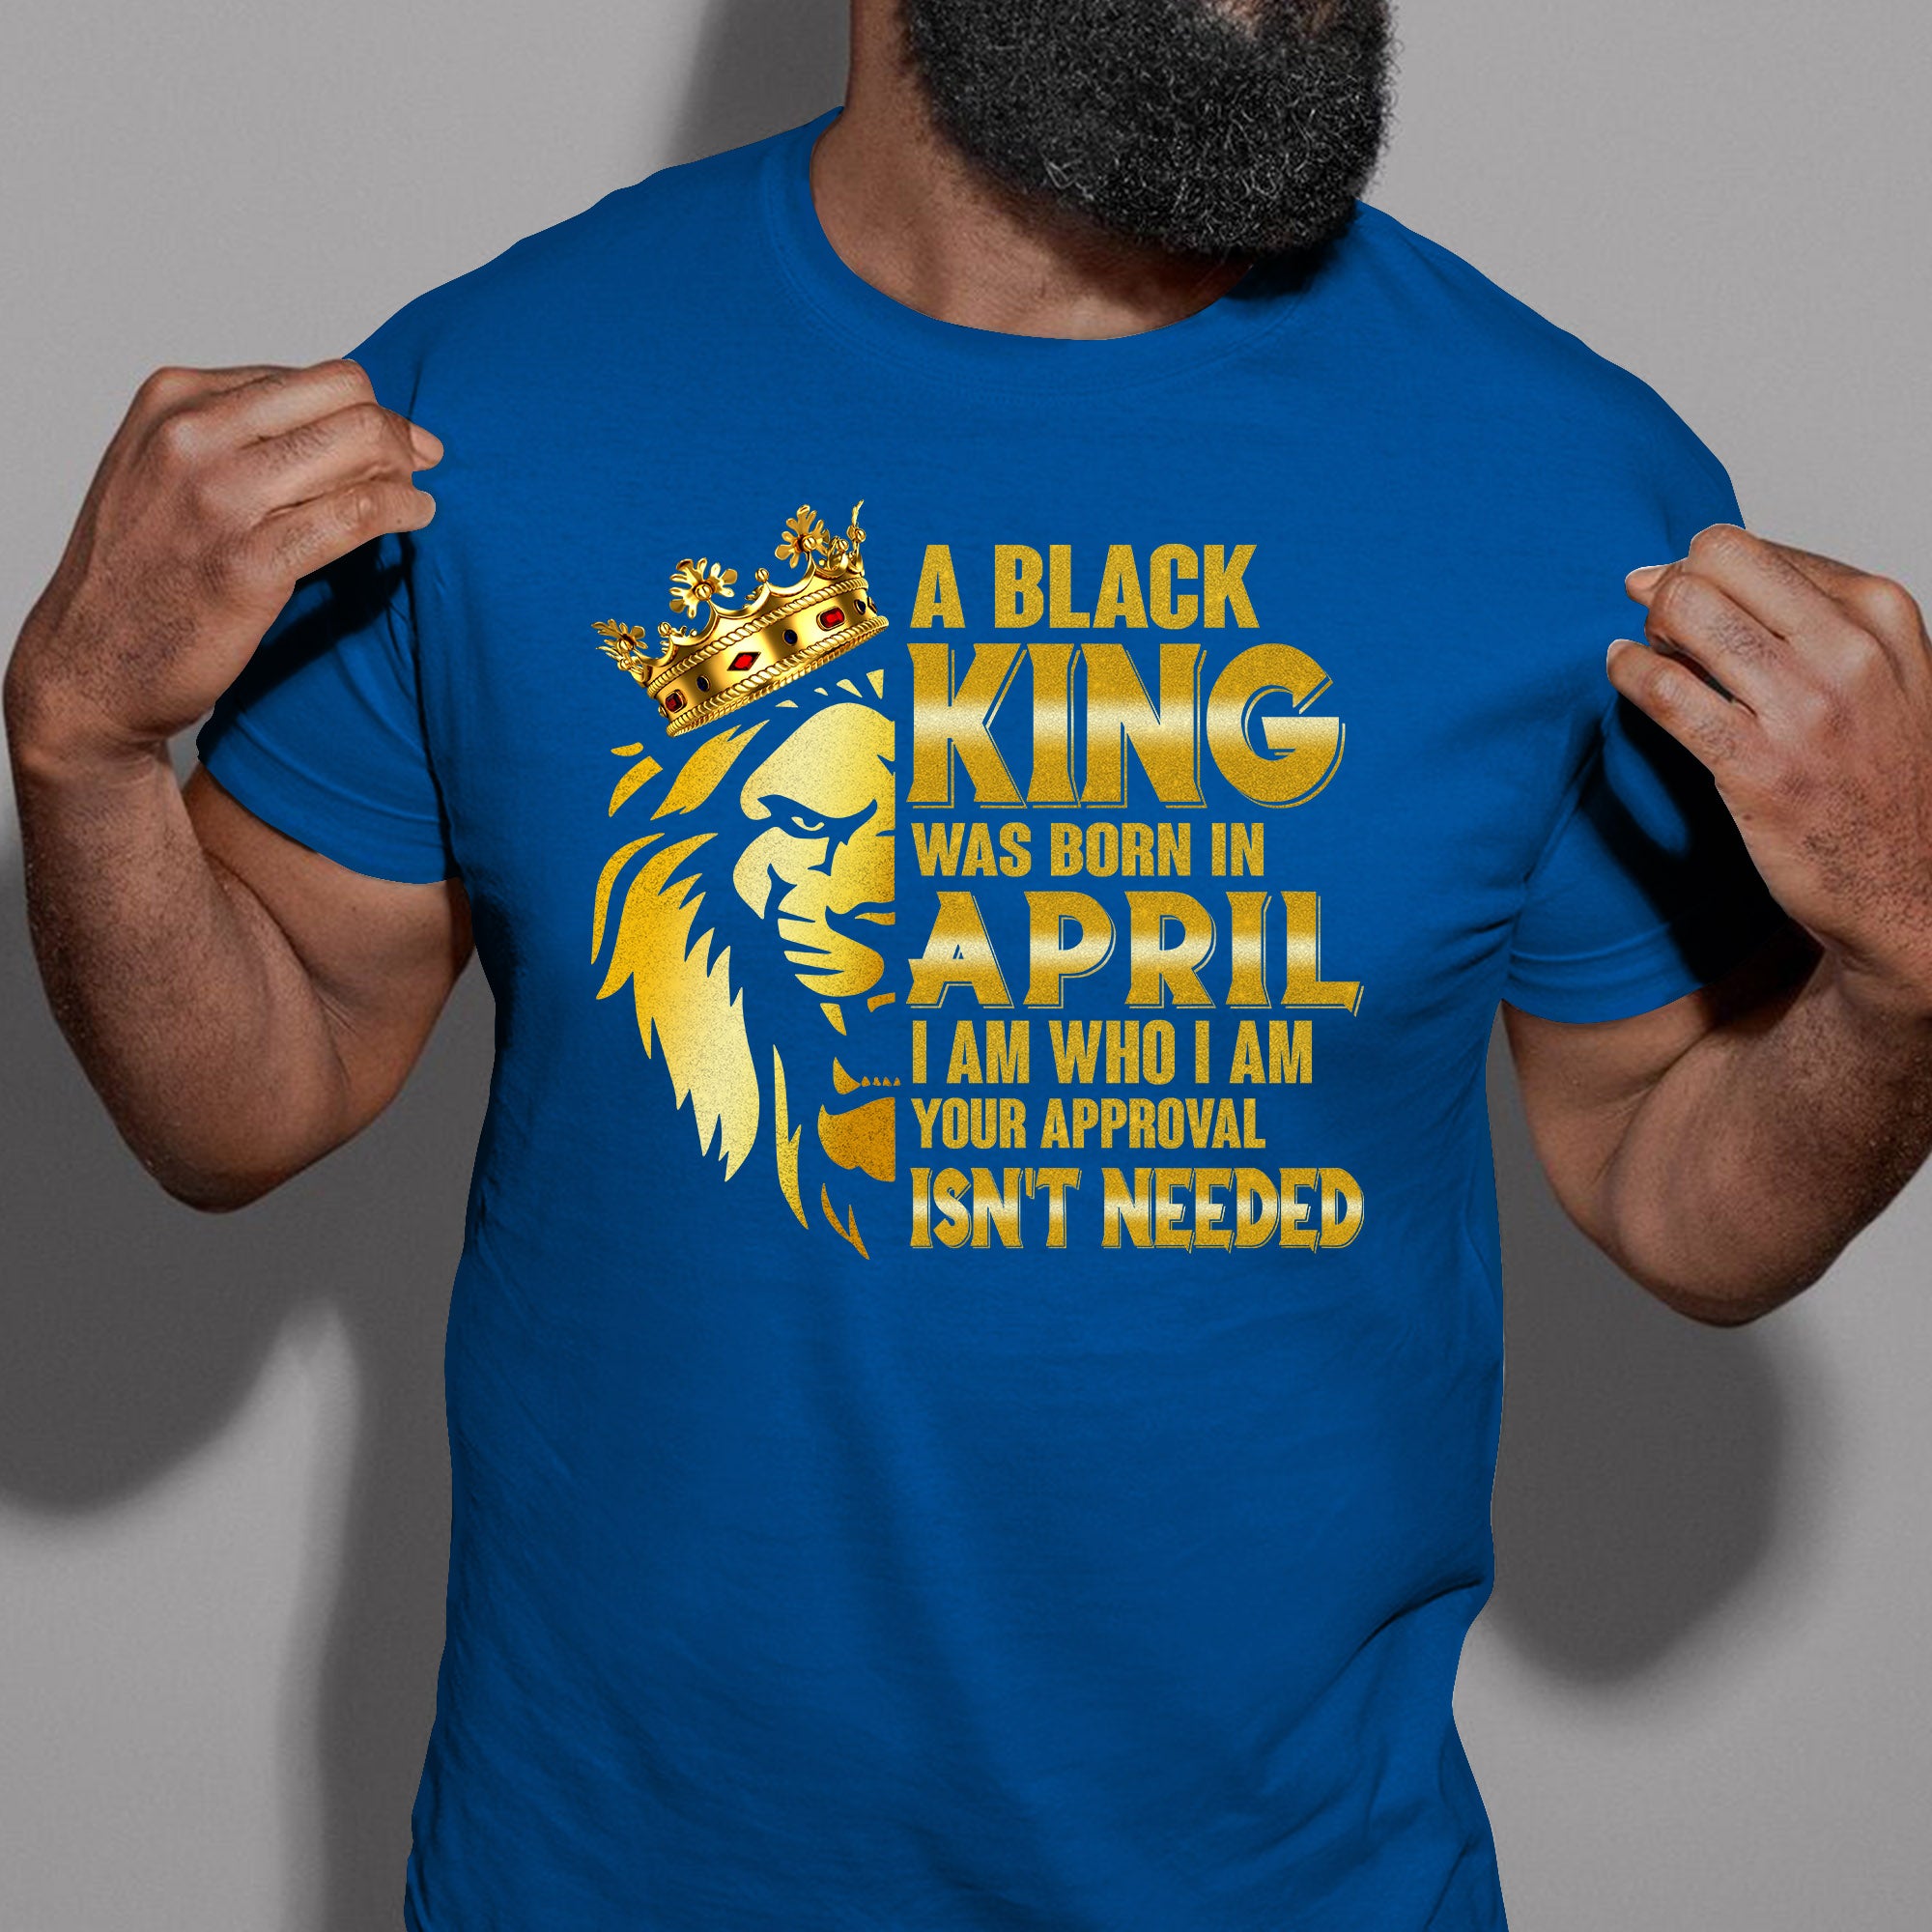 A Black King Was Born In April T-shirt